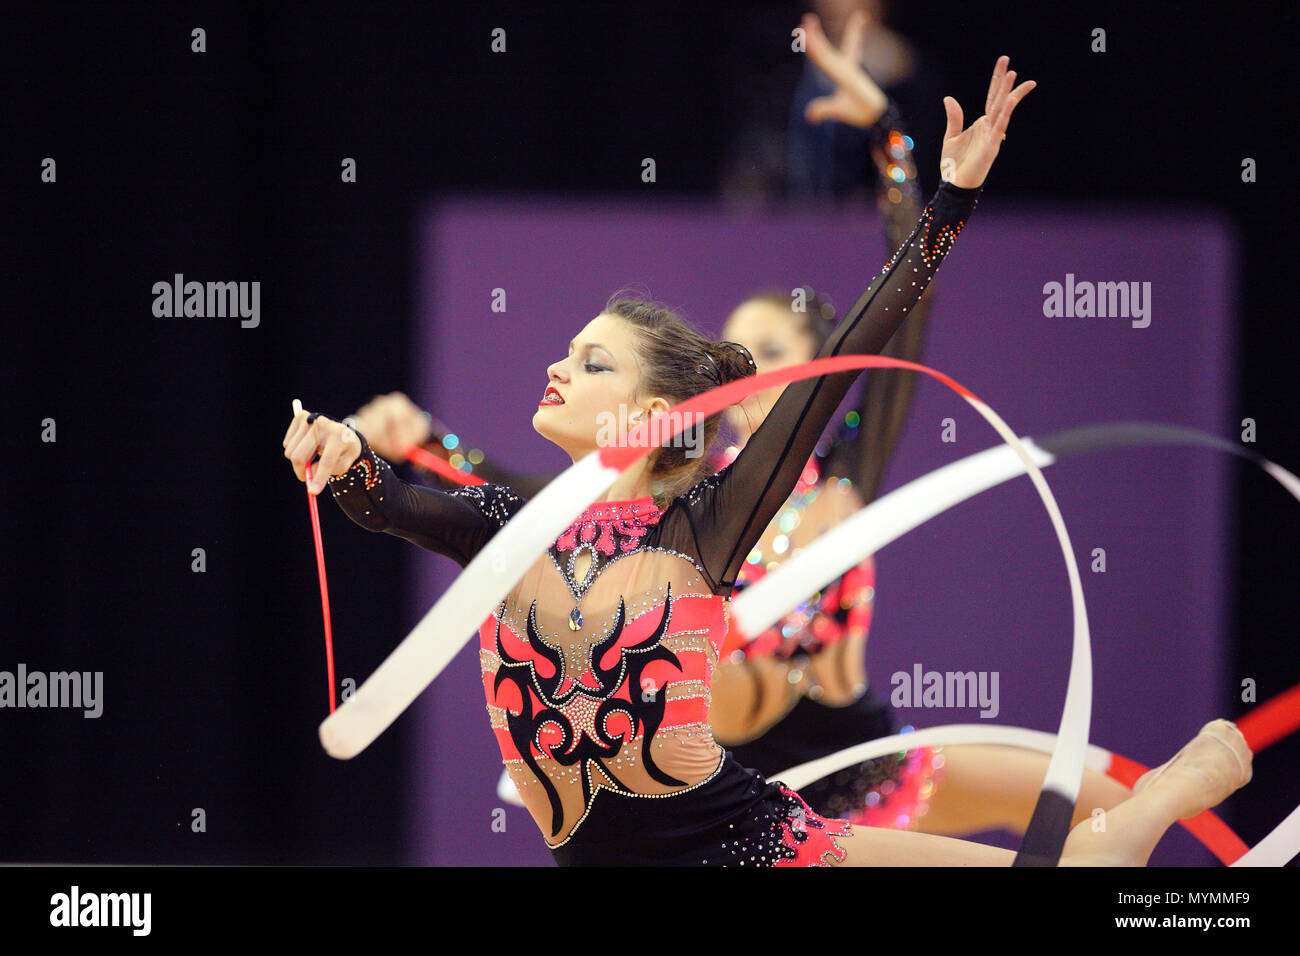 Visa Federation of International Gymnastics (FIG) - The team from Greece perform with the Ribbon and Hoop during the Women's Group Rhythmic Final Olympic qualification event at the O2 Arena London 18 January 2012 --- Image by © Paul Cunningham Stock Photo